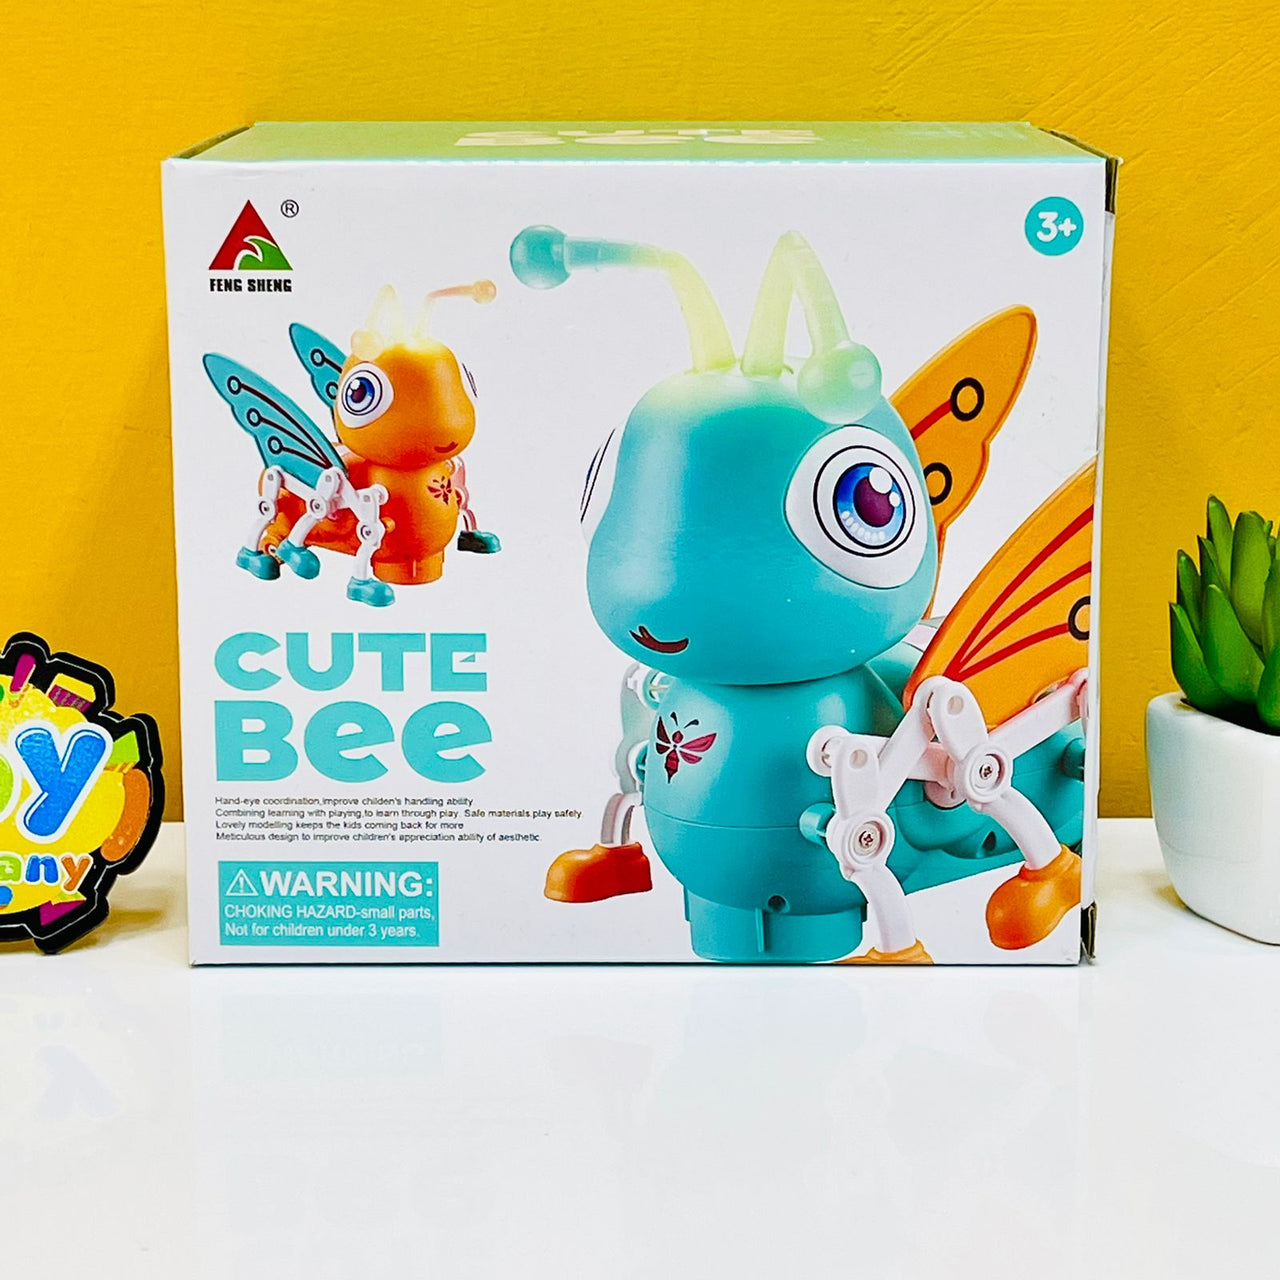 Cute Bee Crawling Toy with Lights & Sound